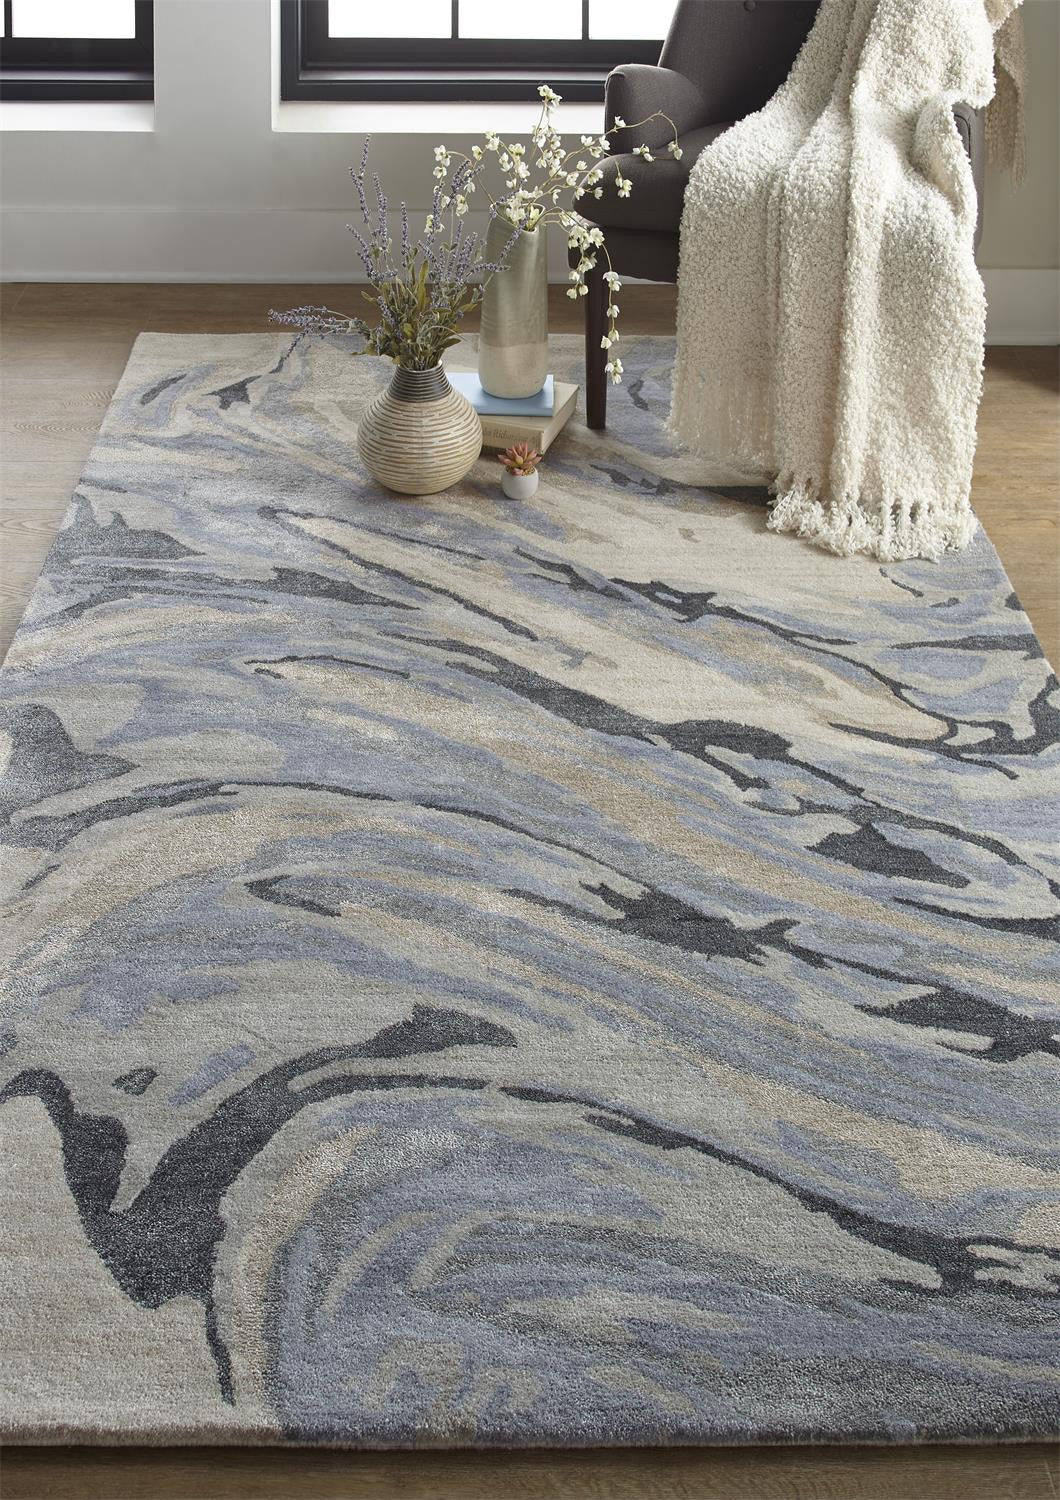 4' X 6' Blue Gray And Taupe Abstract Tufted Handmade Area Rug